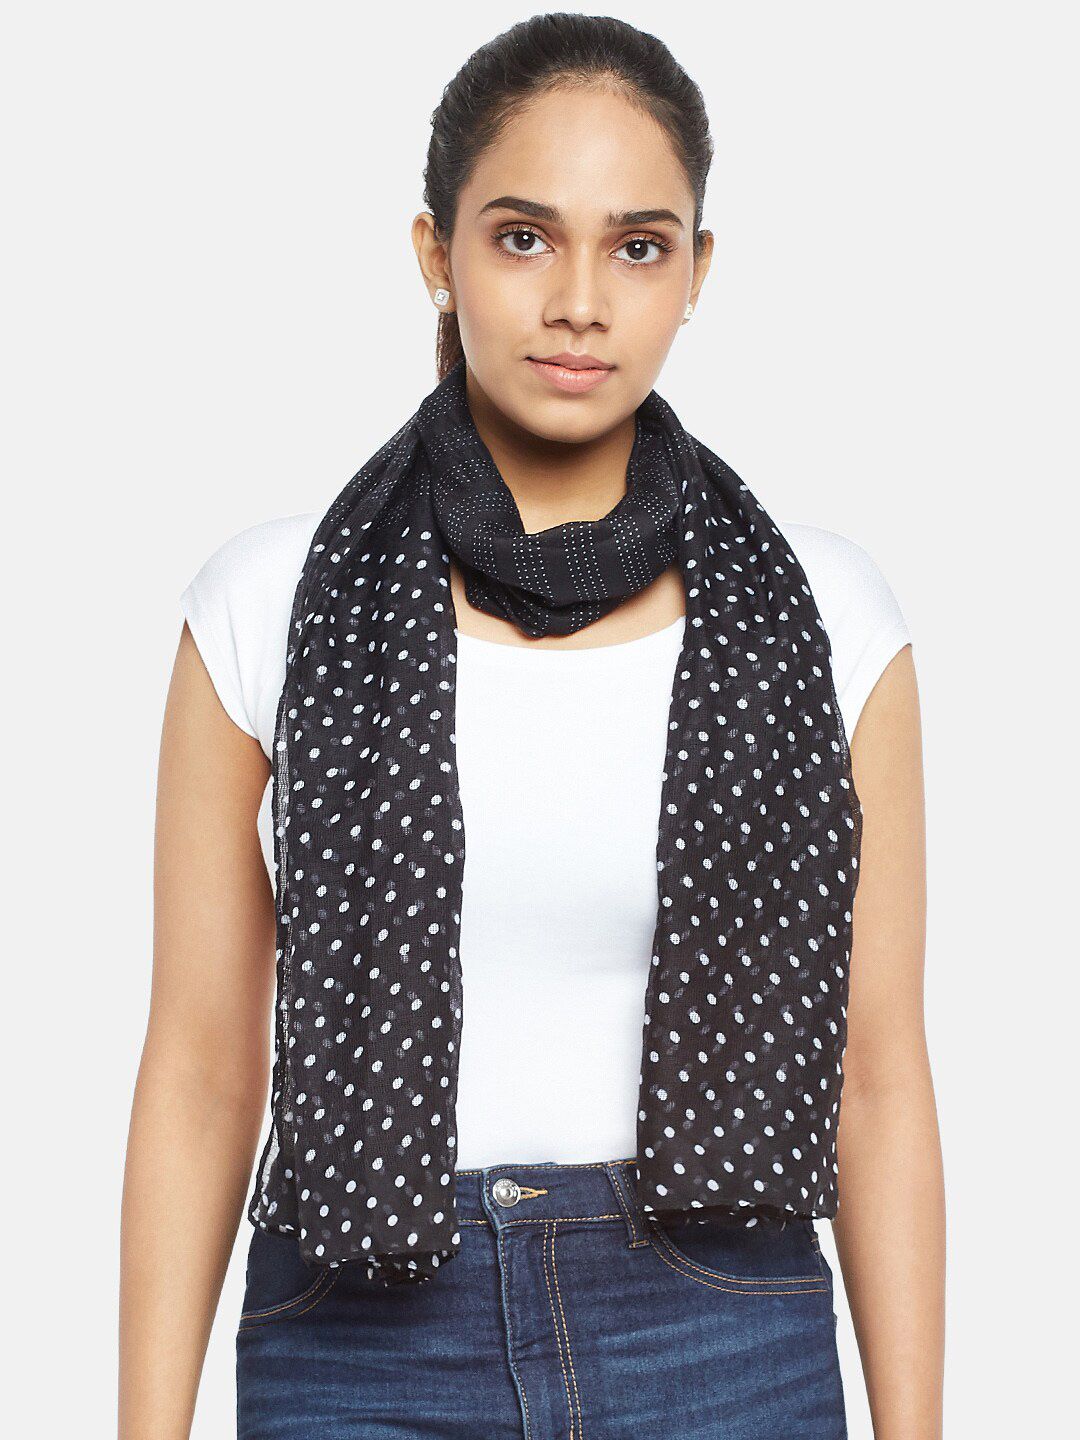 Honey by Pantaloons Women Black & White Printed Scarf Price in India